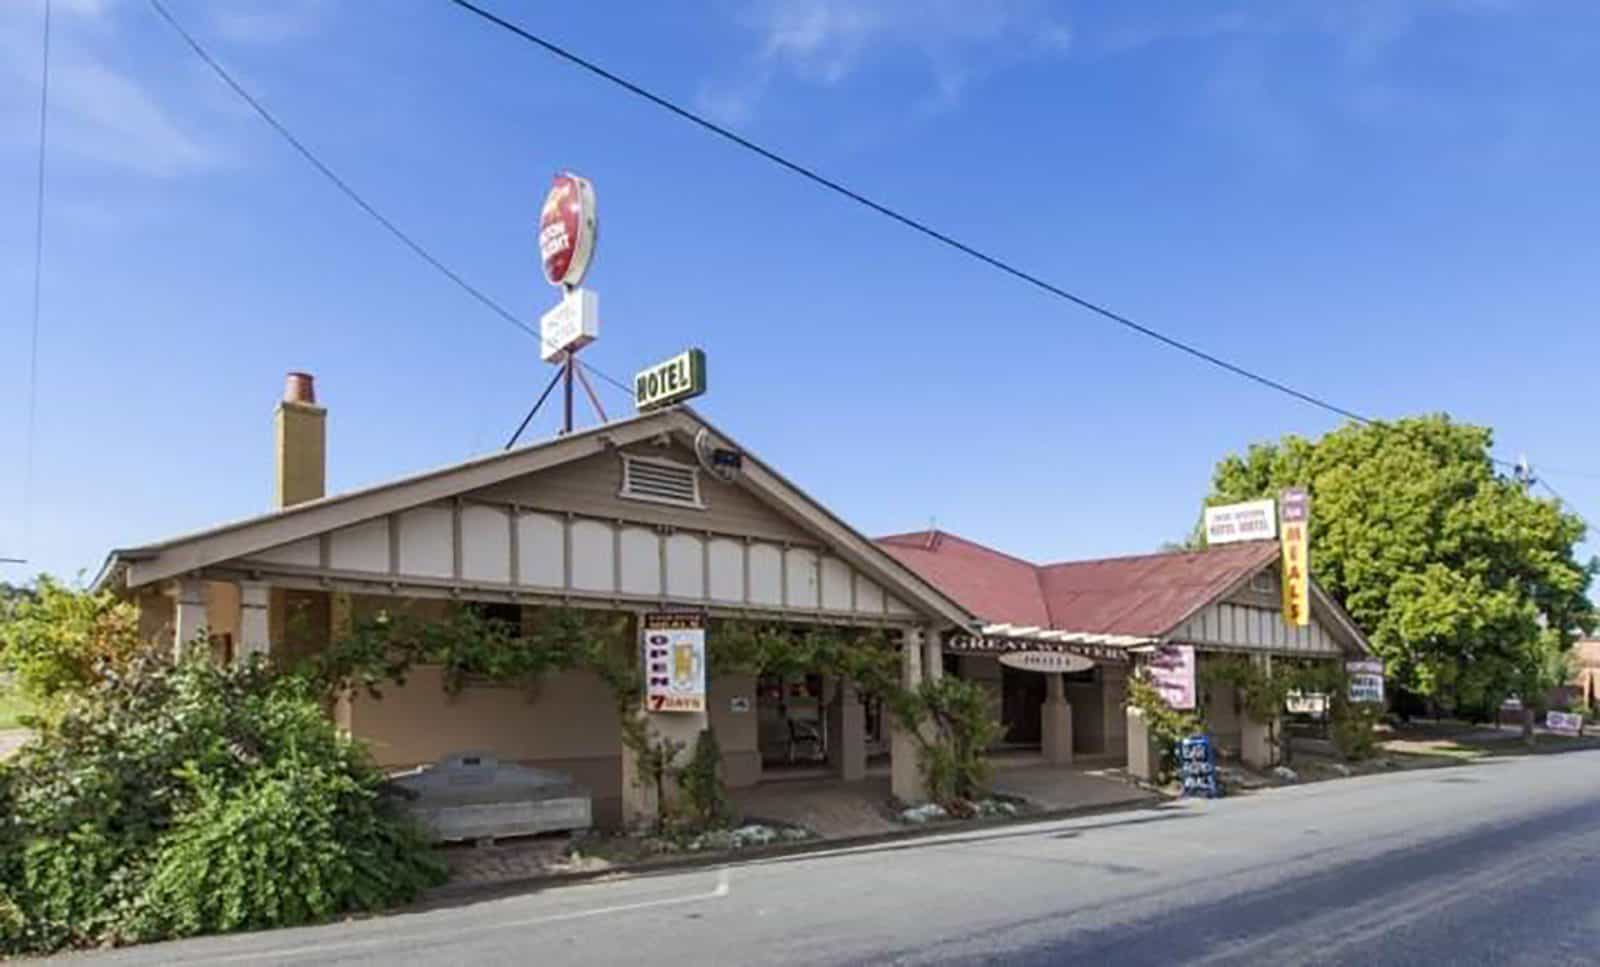 Situated at the foothills of the Grampians, the Great Western Hotel.